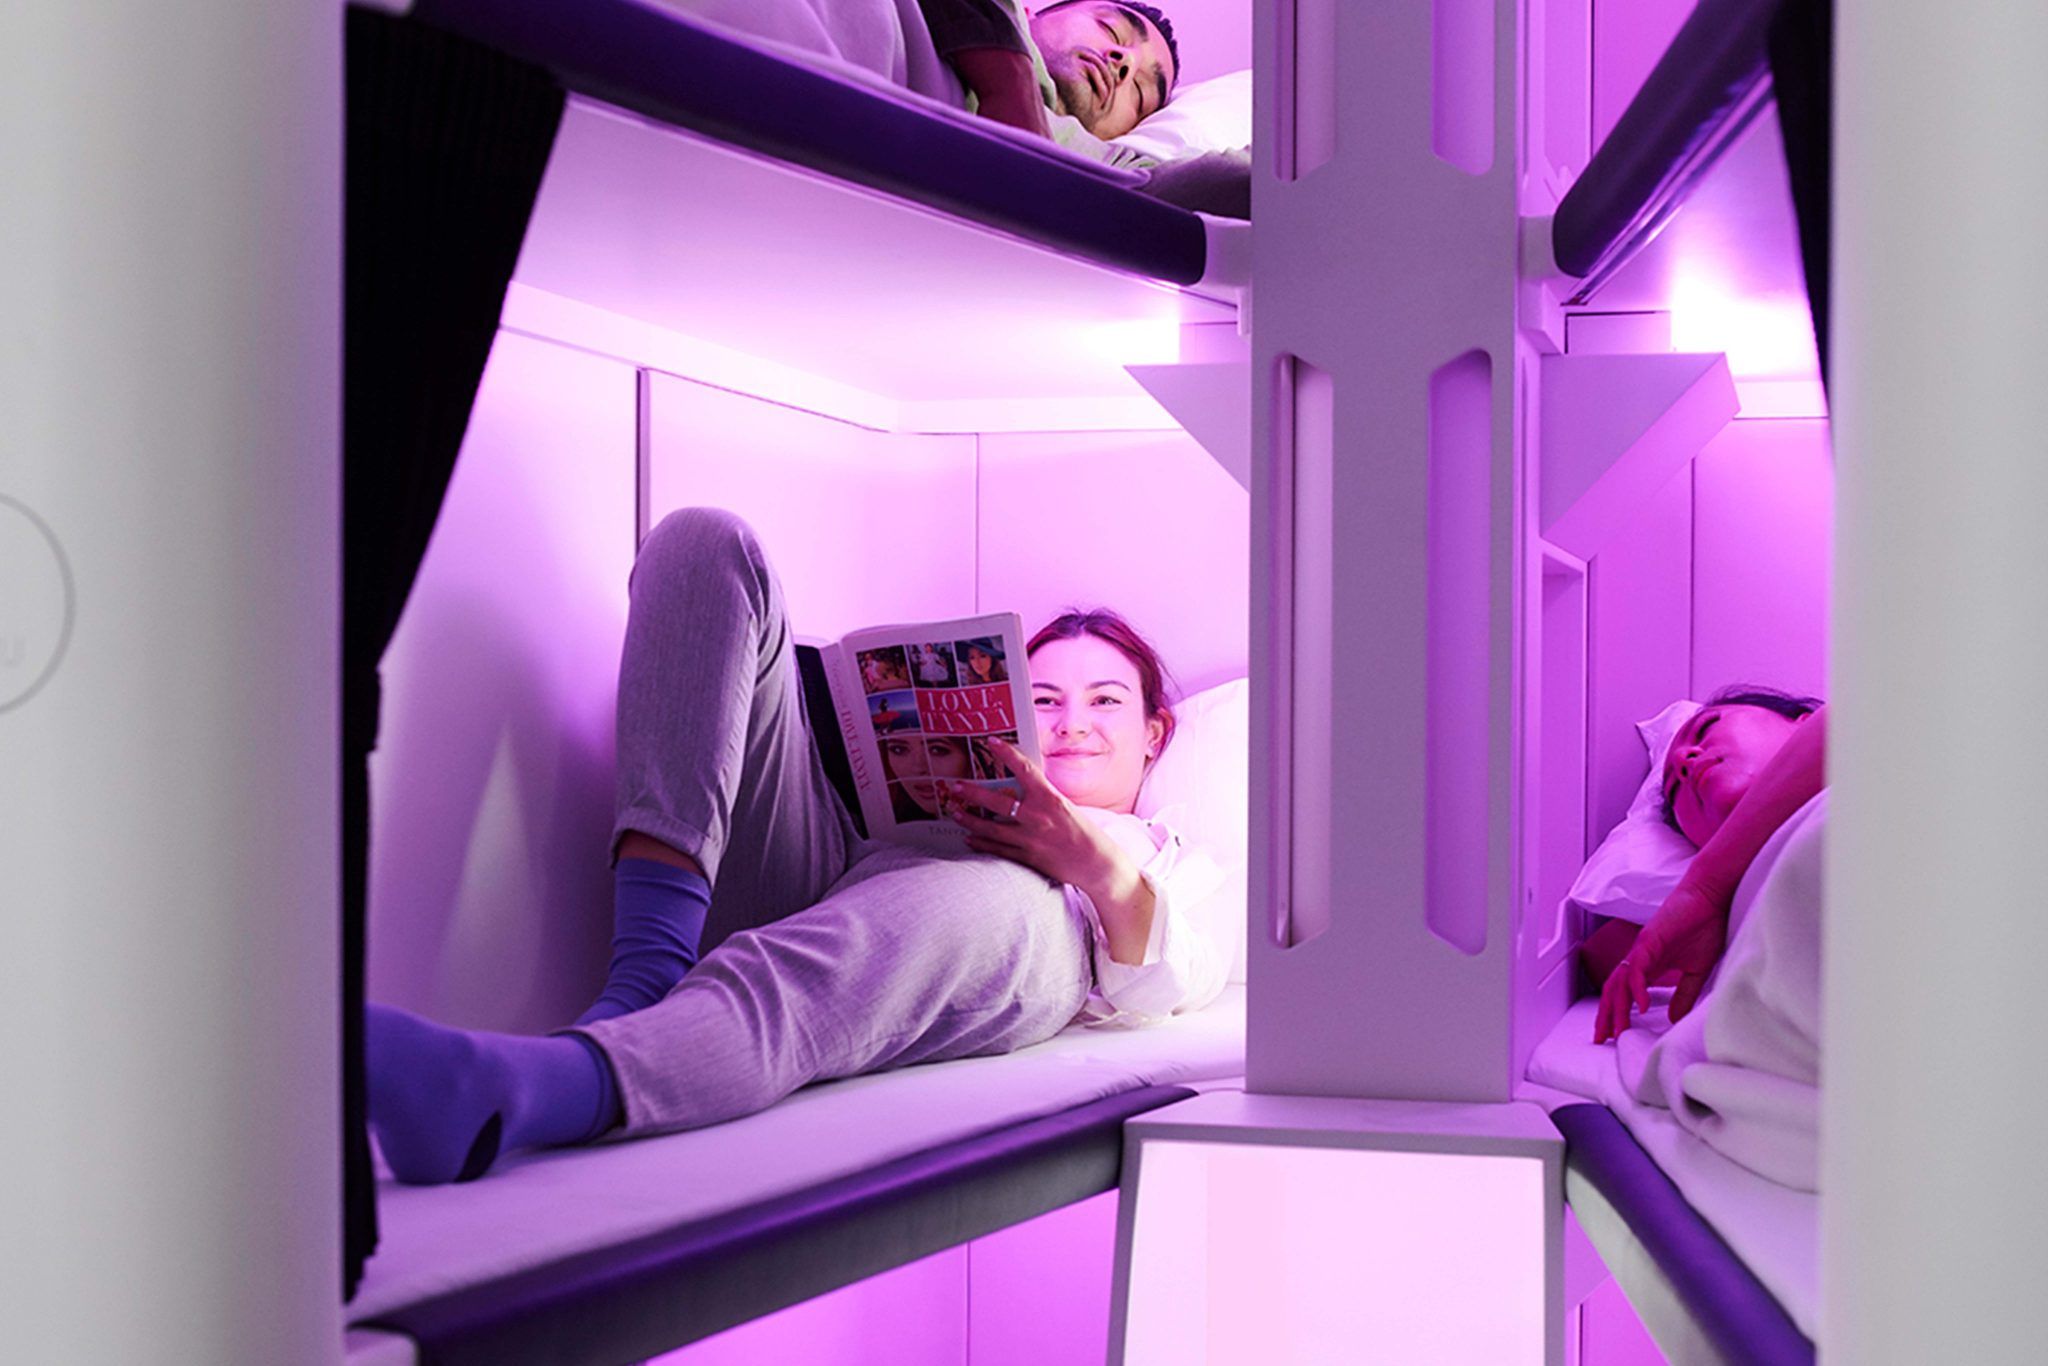 Buckle up: The world’s first economy airplane bunk beds are coming